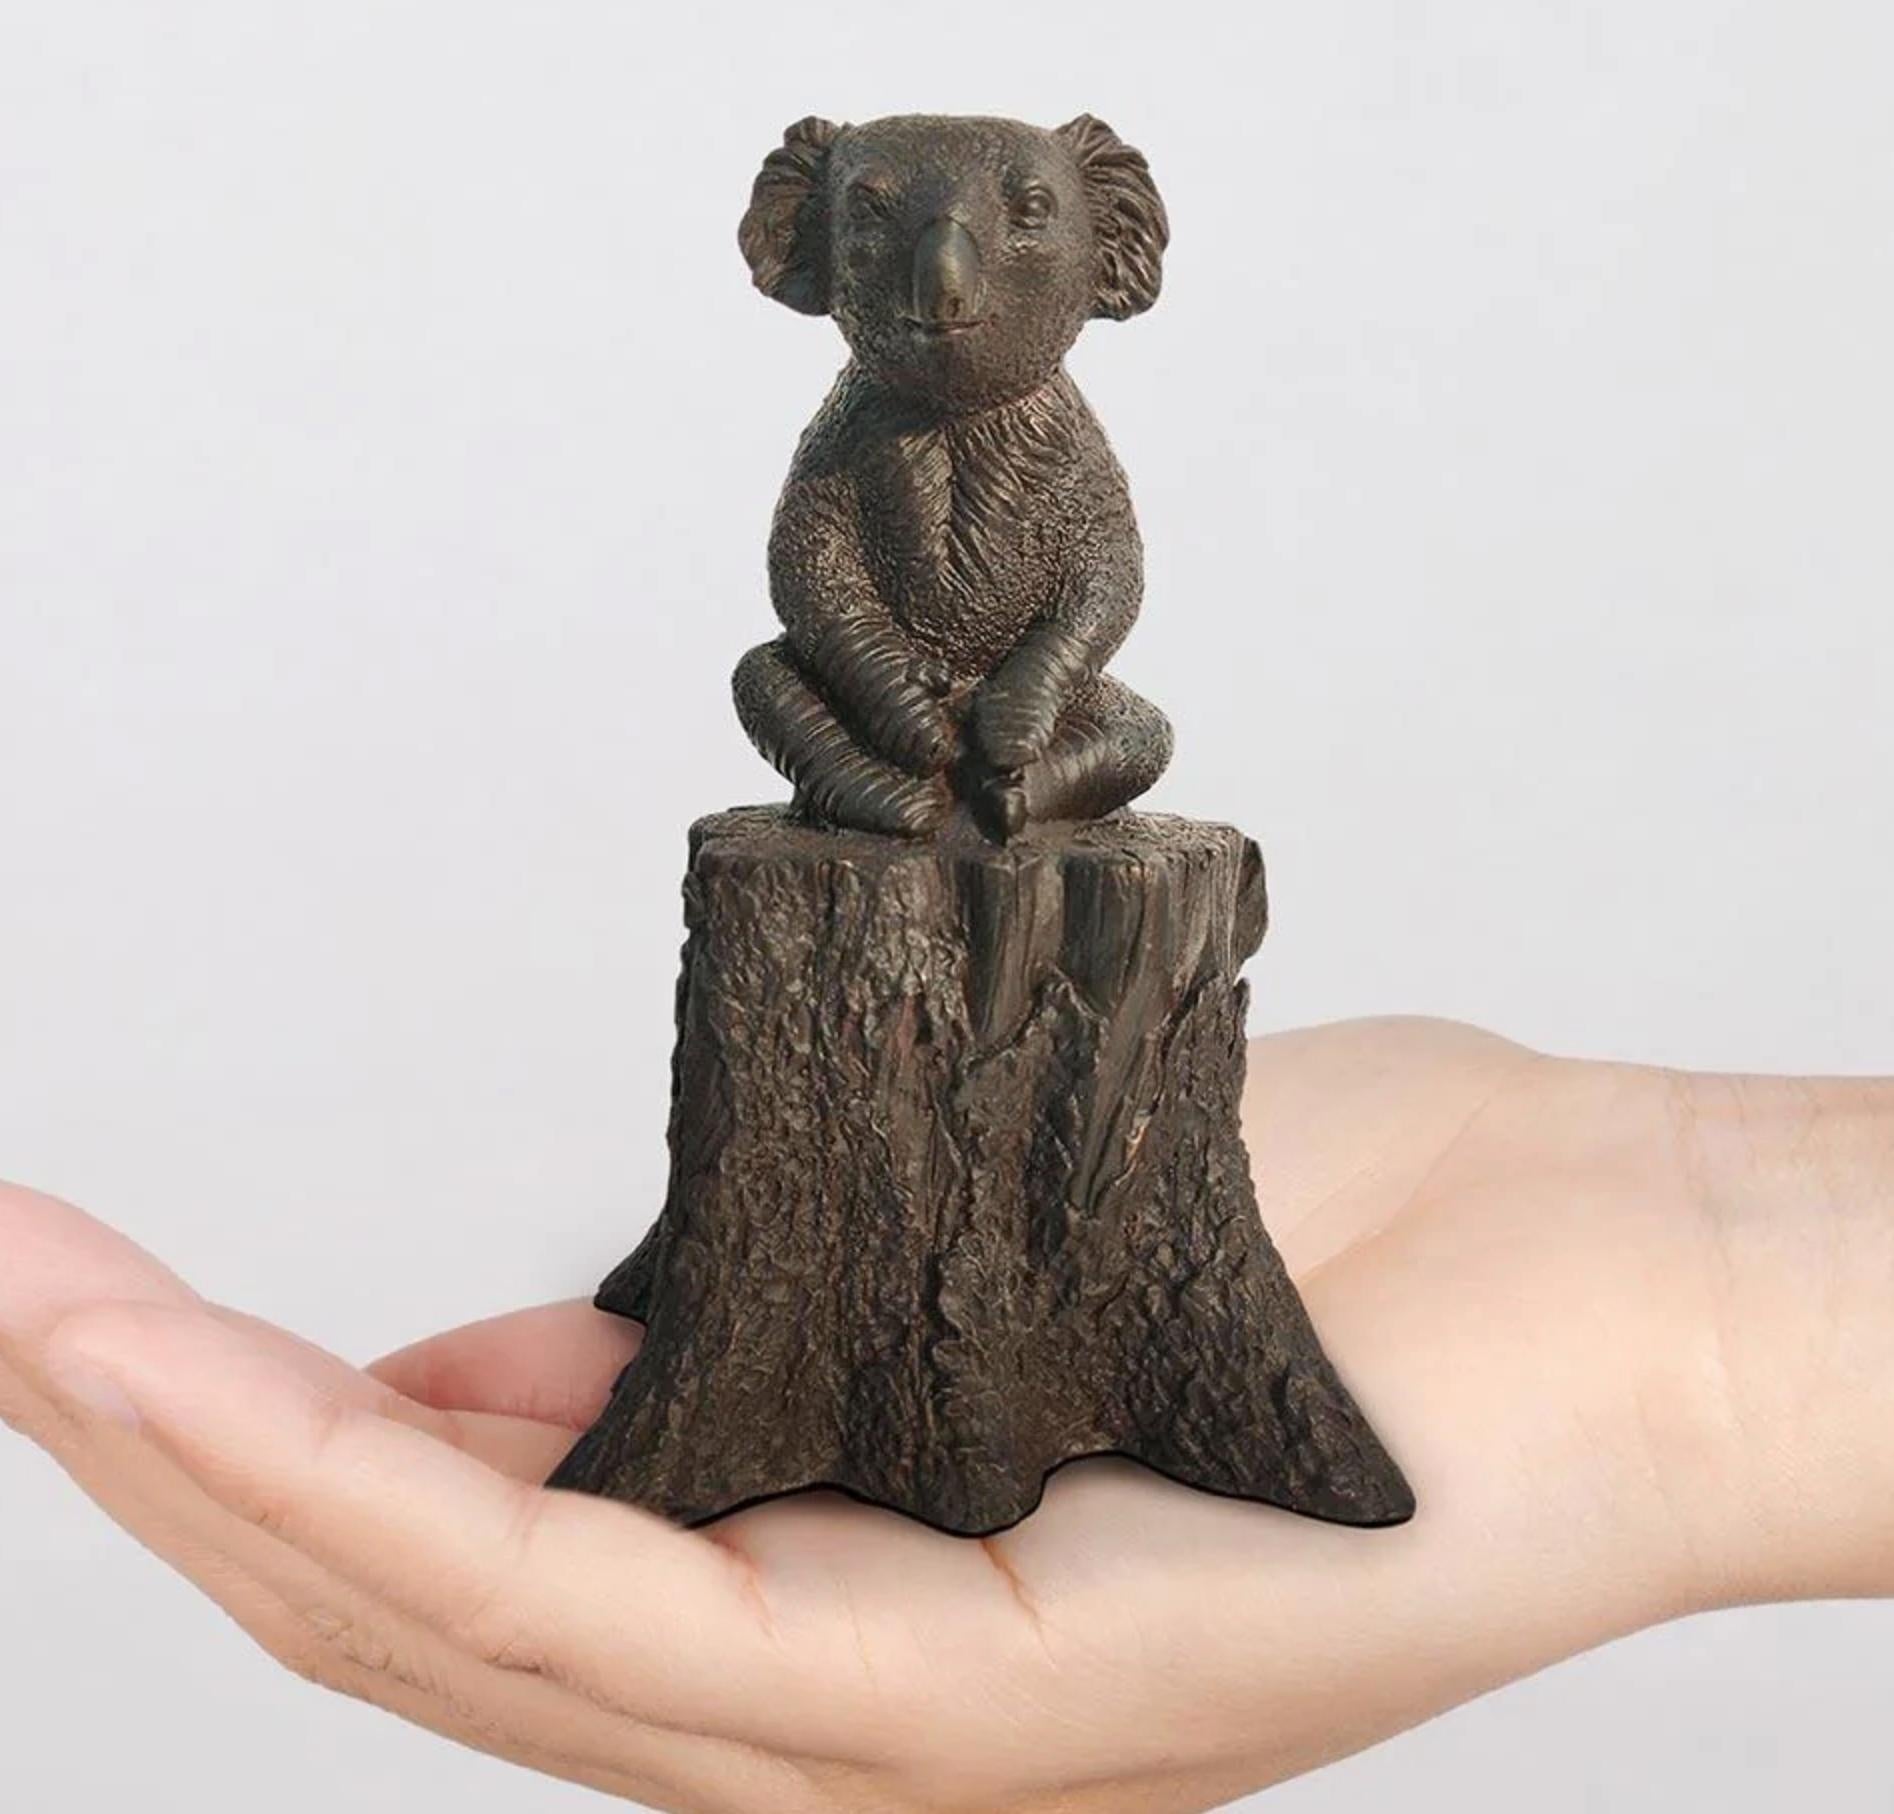 Title: Lewis the koala on
Authentic bronze sculpture

This authentic bronze sculpture titled 'Lewis the koala on' by artists Gillie and Marc has been meticulously crafted in bronze. It features a koala sitting on a log and comes in a limited-edition